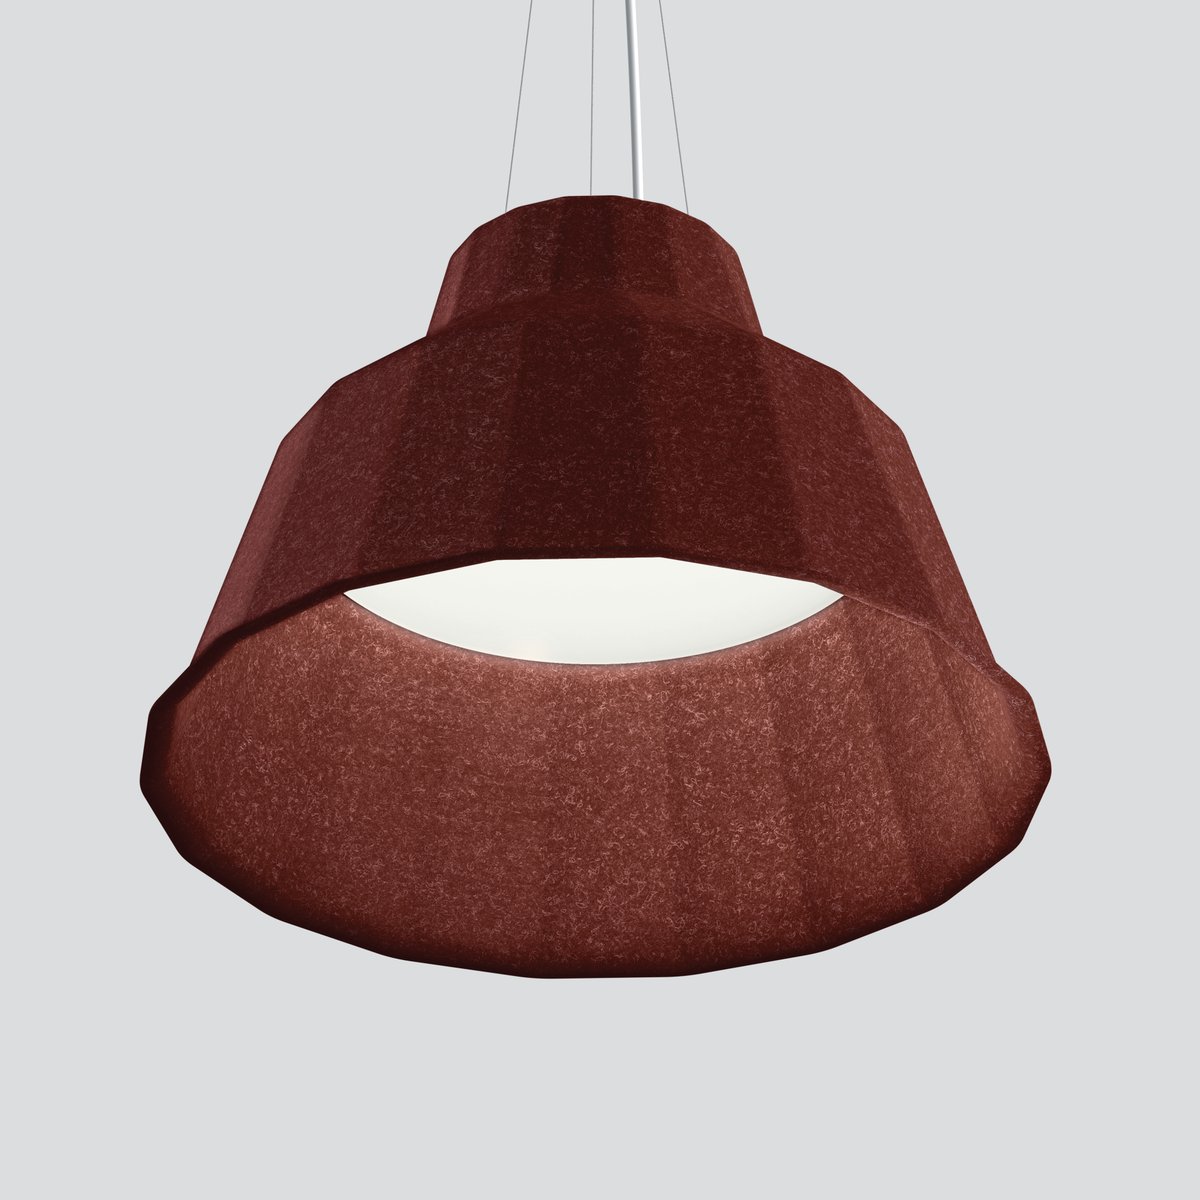 Frank's large, faceted shade is made from sound-absorbing recycled PET felt that increases acoustic comfort in a space. And a powerful light source projects onto a rounded diffuser, creating elegant and efficient illumination.

eurekalighting.com/products/frank/

#eurekalighting